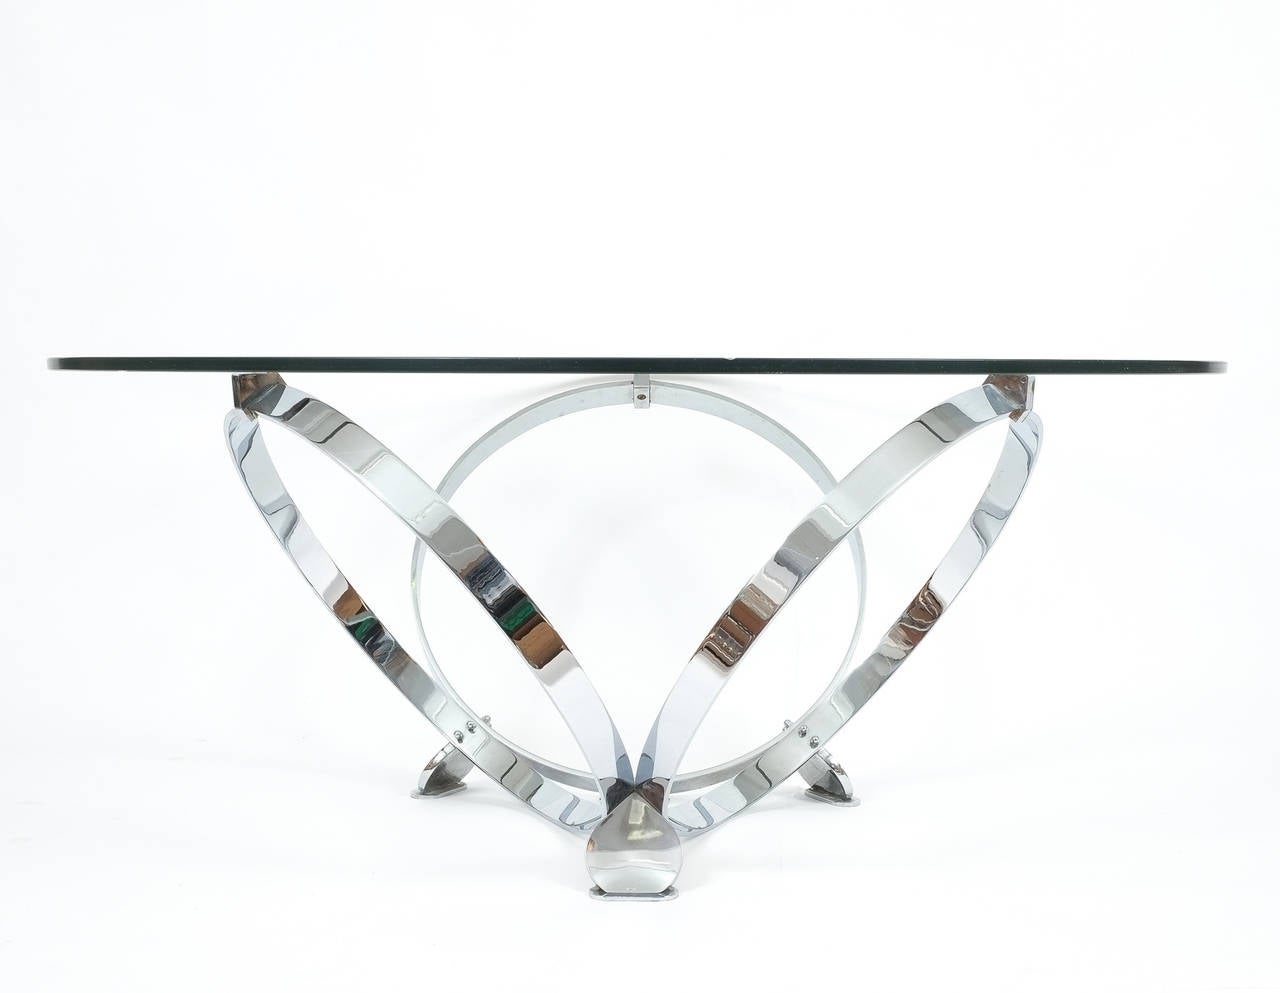 Stylish chrome ring table made from solid chromed metal rings and a floating glass top. Please note that the table will be shipped without the glass table top. We recommend to have the glass top customized locally as shipping fees will rather high.